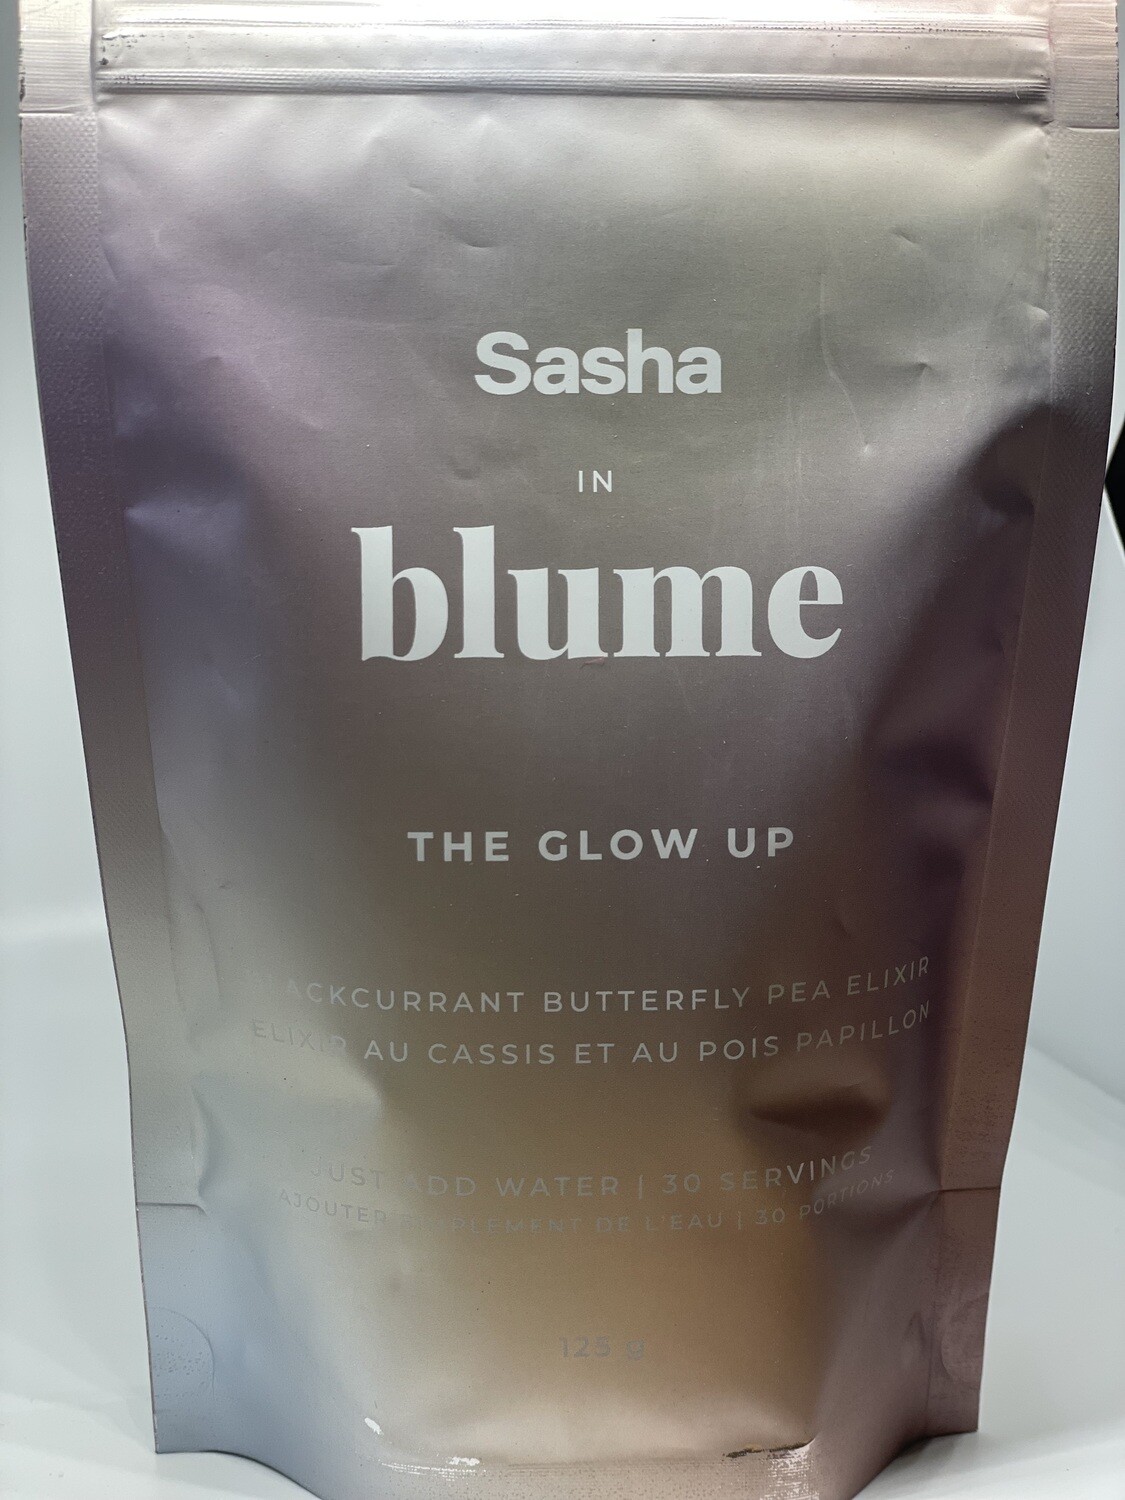 blume - The Glow Up